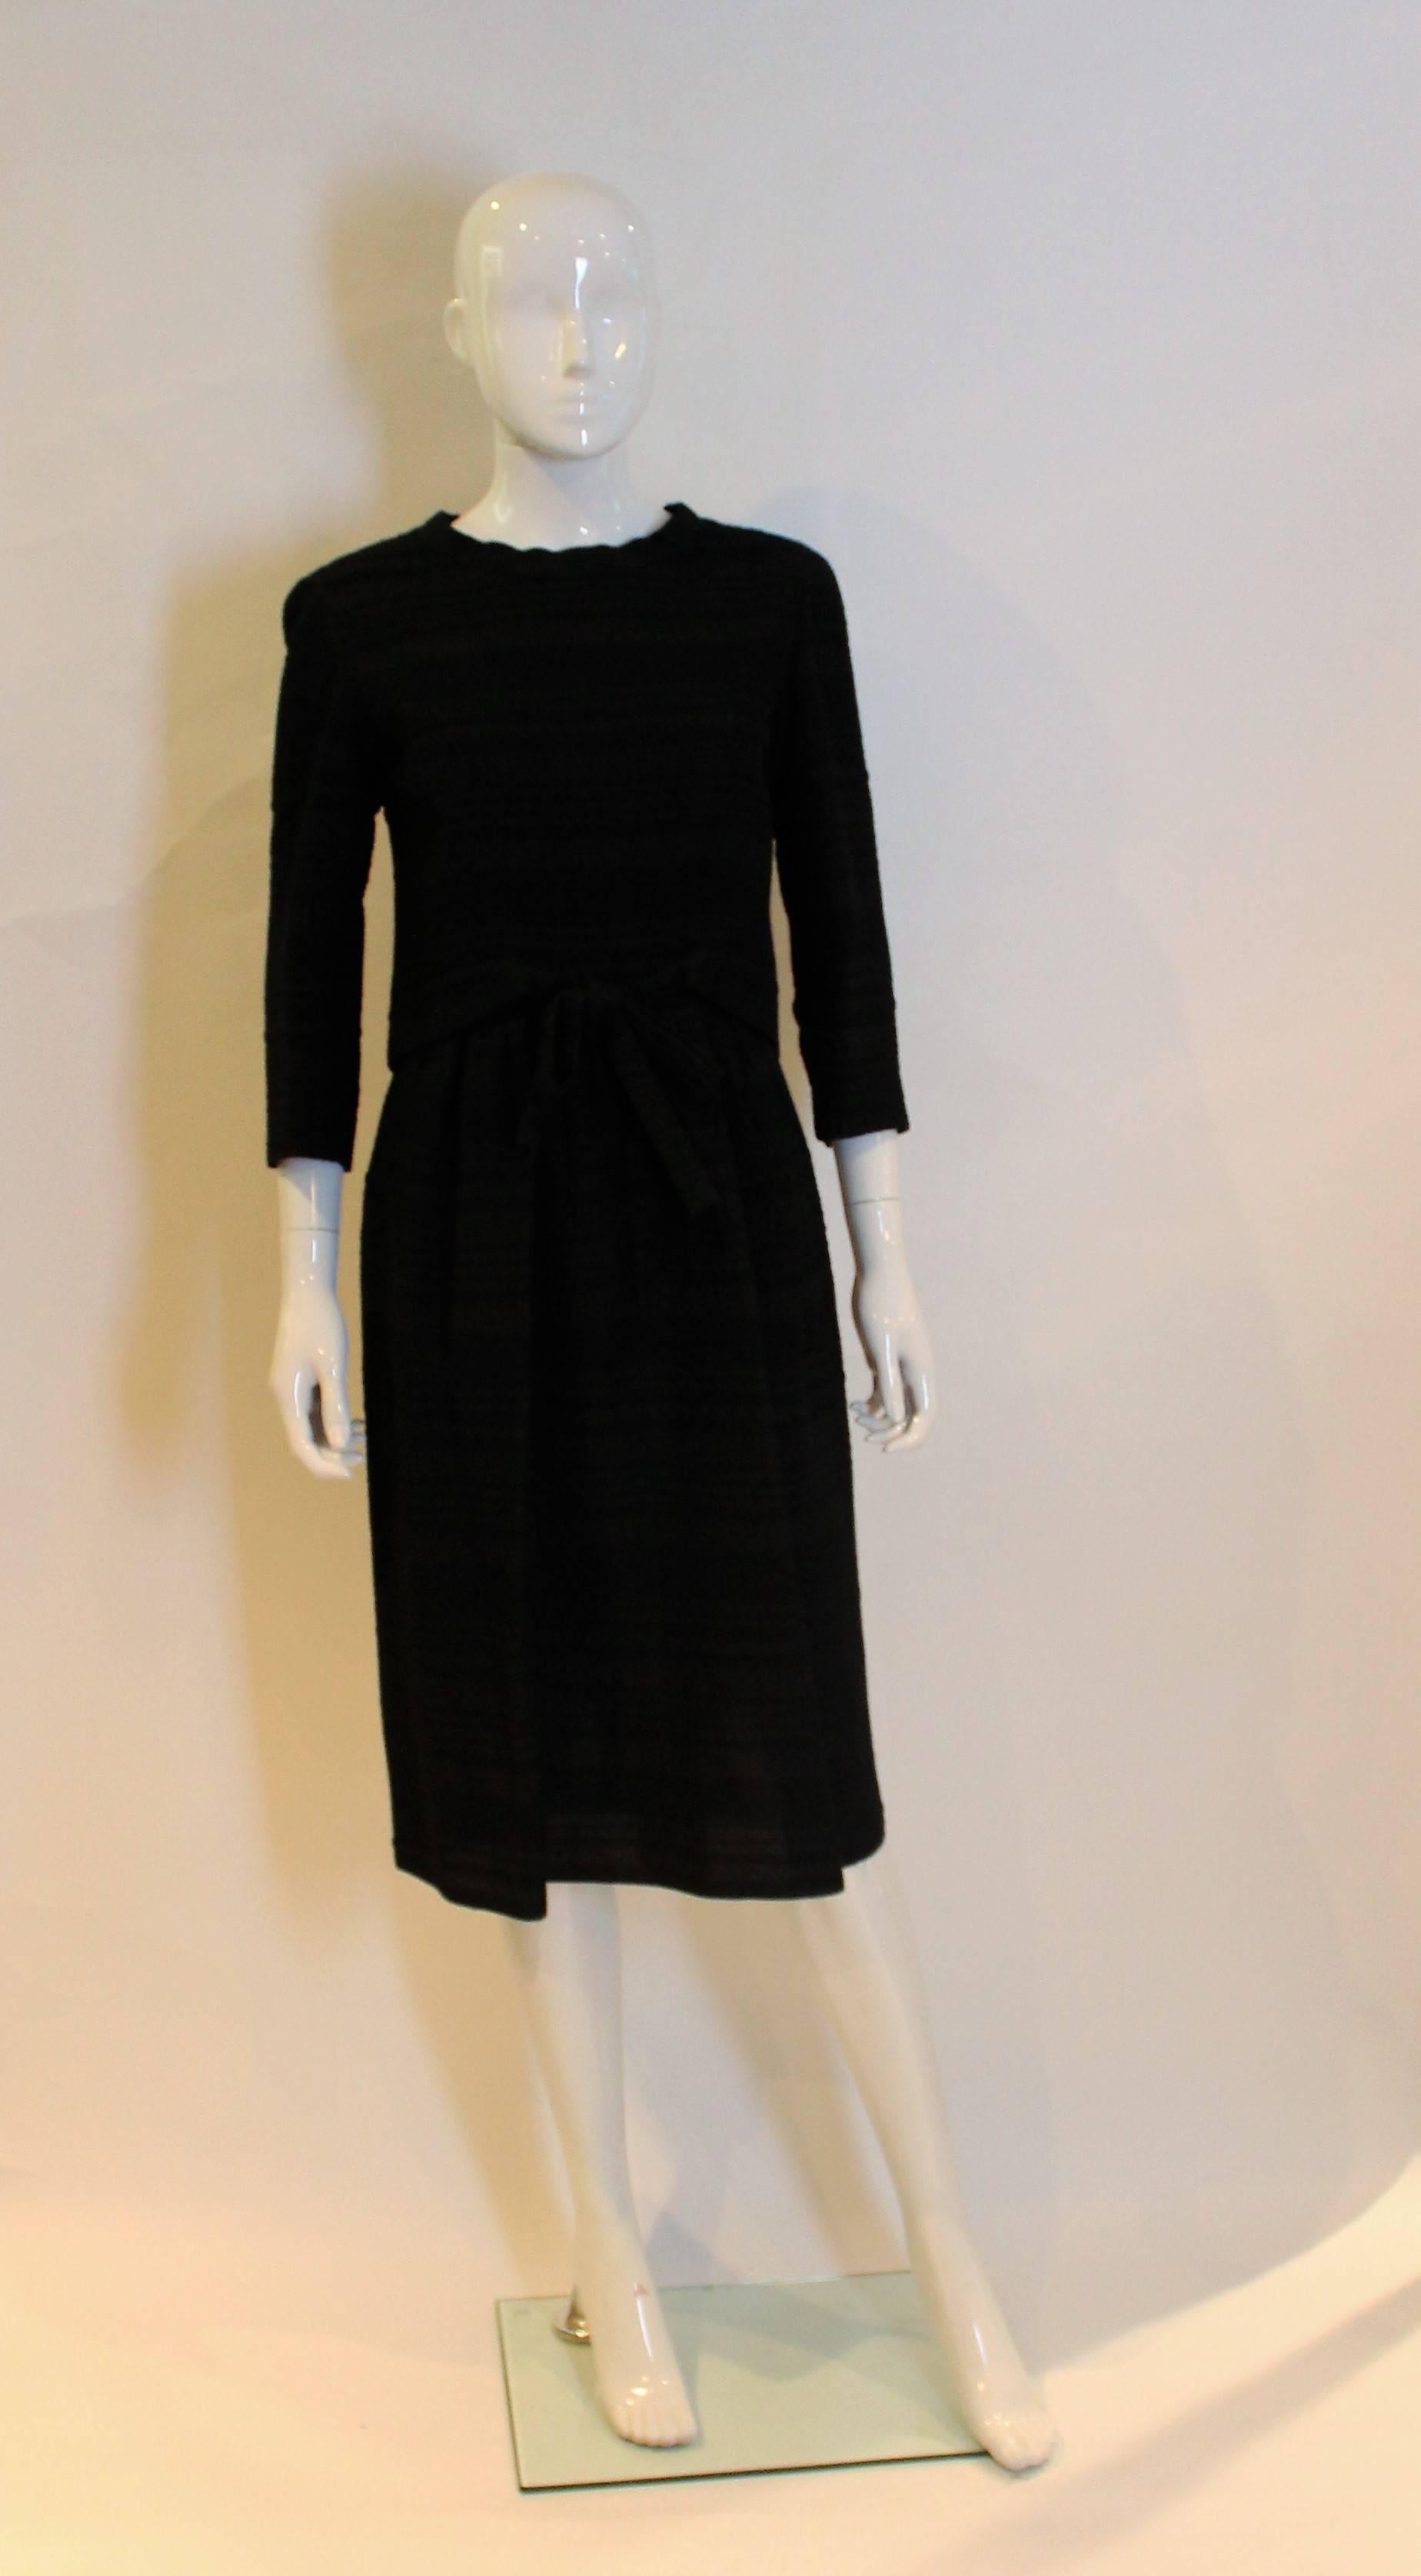 A chic dinner dress by Balmain.
In a seersucker like fabric with silk lining.This dress is beautifuly  made with an outer zip to waist leval and internal zip for the lining. It has a 5 button back and elbow length sleeves.